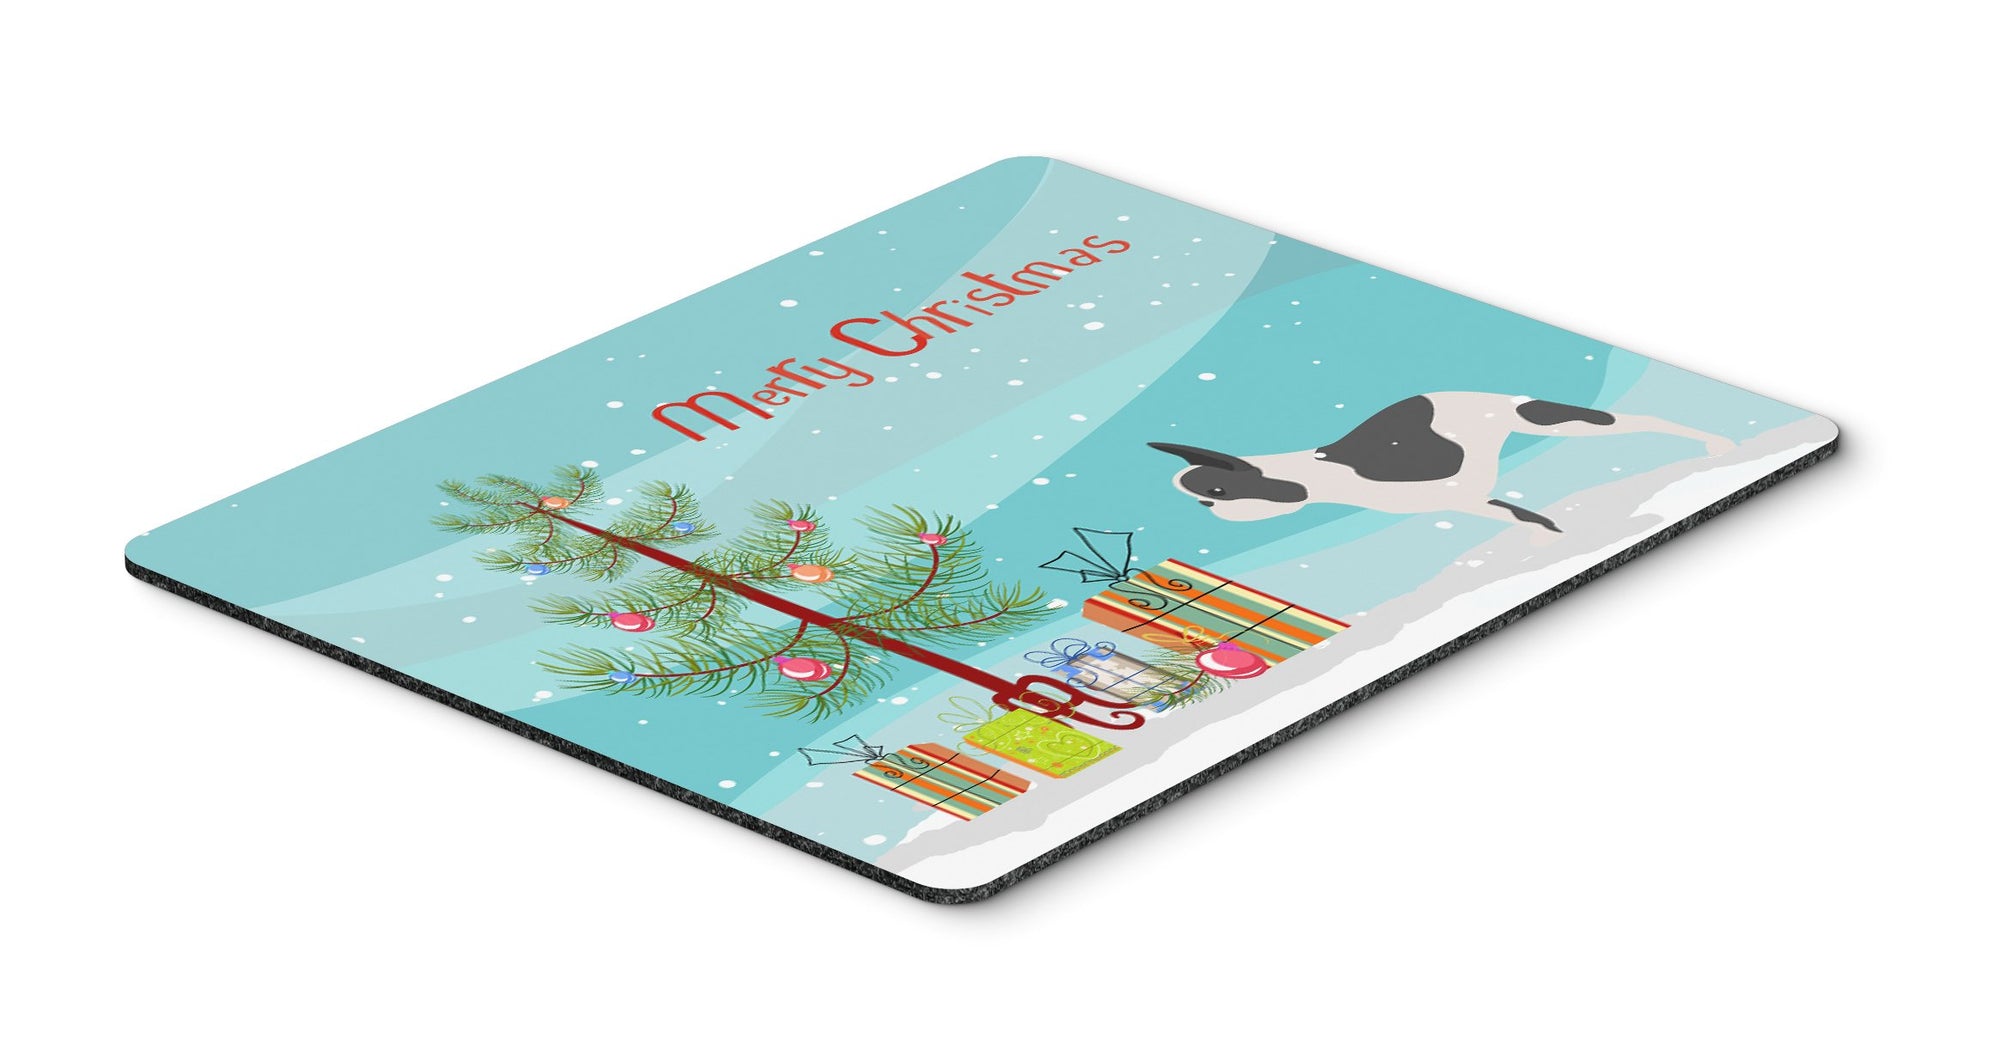 French Bulldog Merry Christmas Tree Mouse Pad, Hot Pad or Trivet by Caroline's Treasures